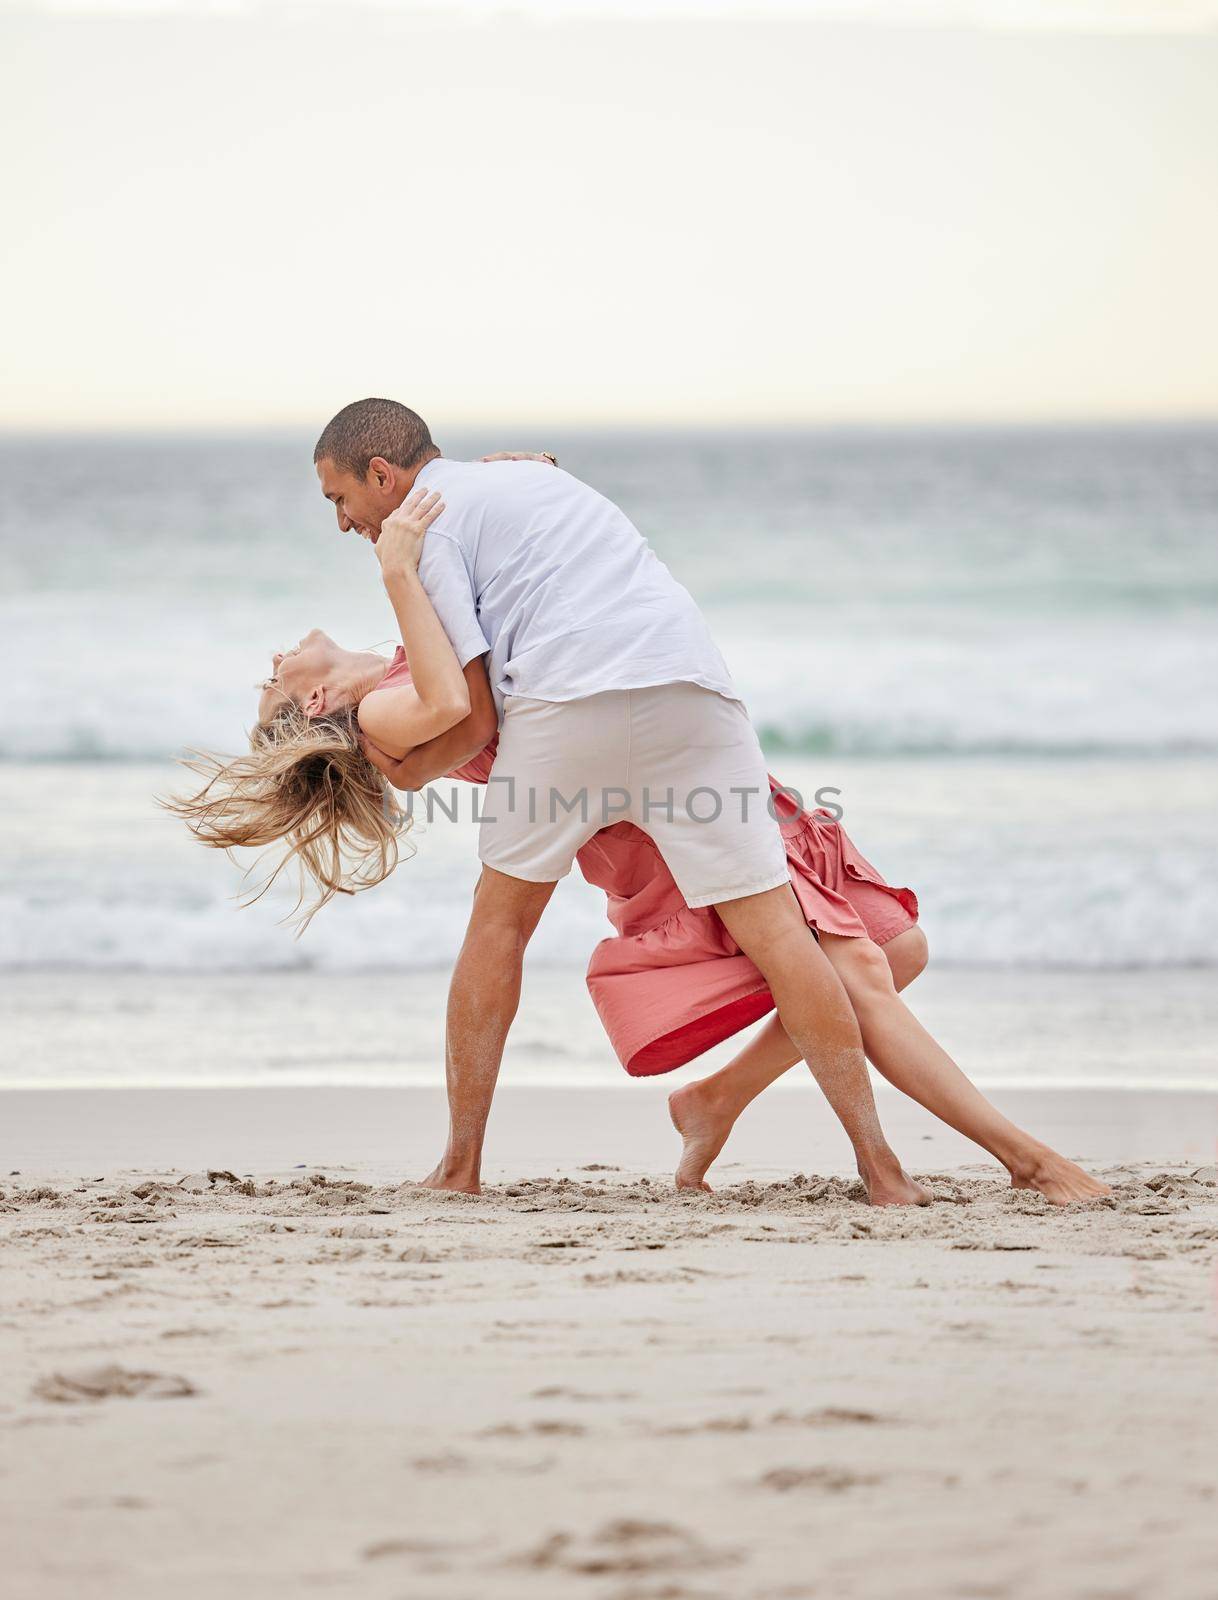 Dancing, happy couple and beach celebrate of love, trust and engagement on romantic luxury holiday travel Bali vacation. Man and woman or dancer couple celebration on sea water, sand and sunset ocean by YuriArcurs